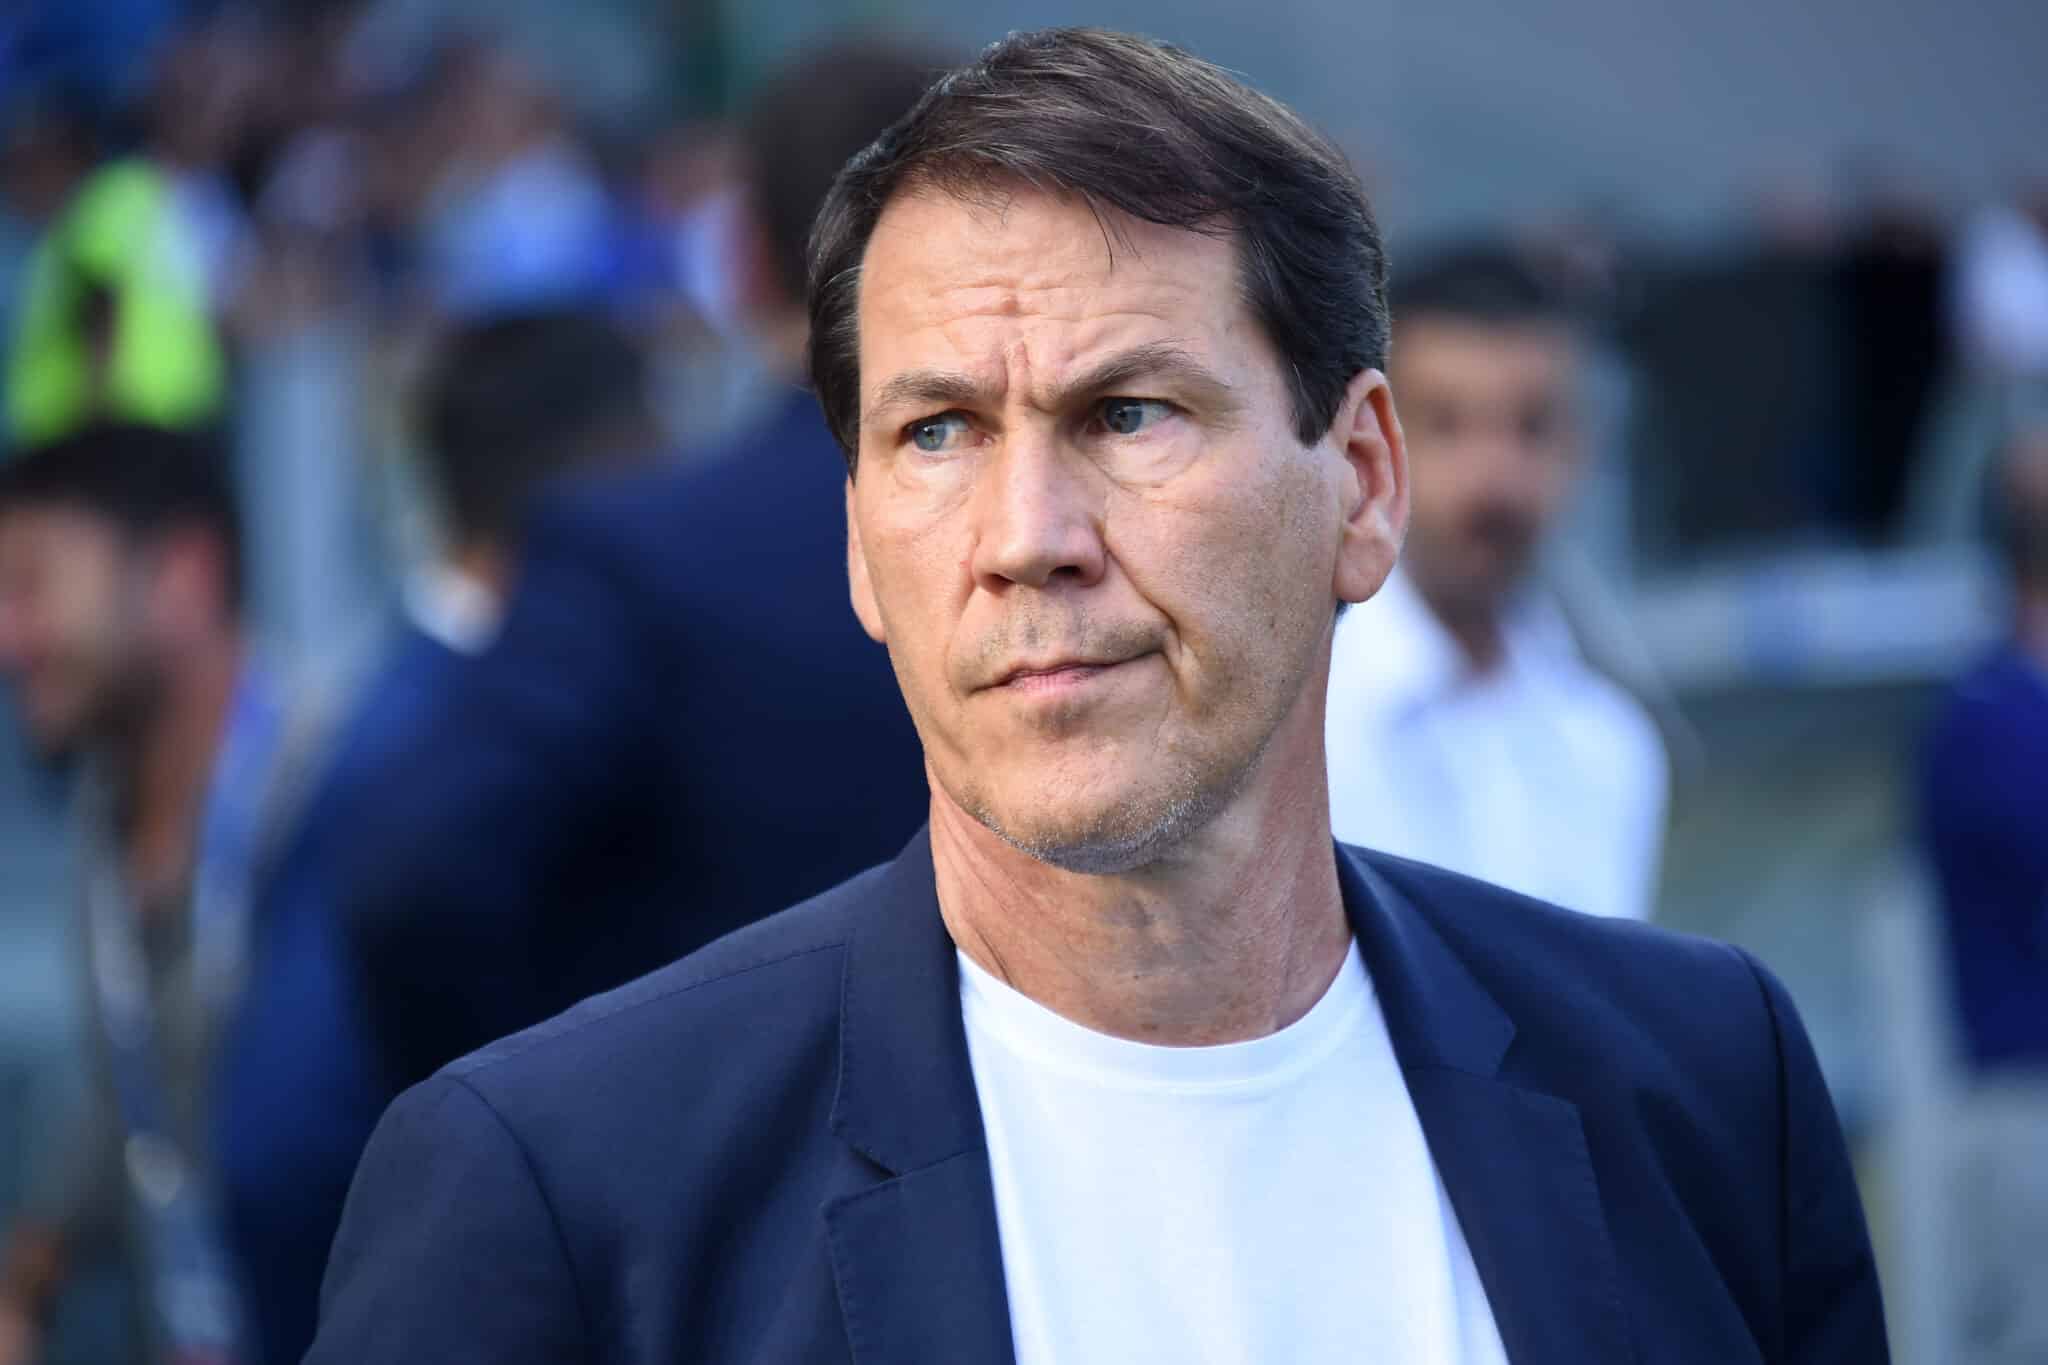 Rudi Garcia is on very shaky ground given the recent Napoli results, and a clause in his contract doesn’t work in his favor.